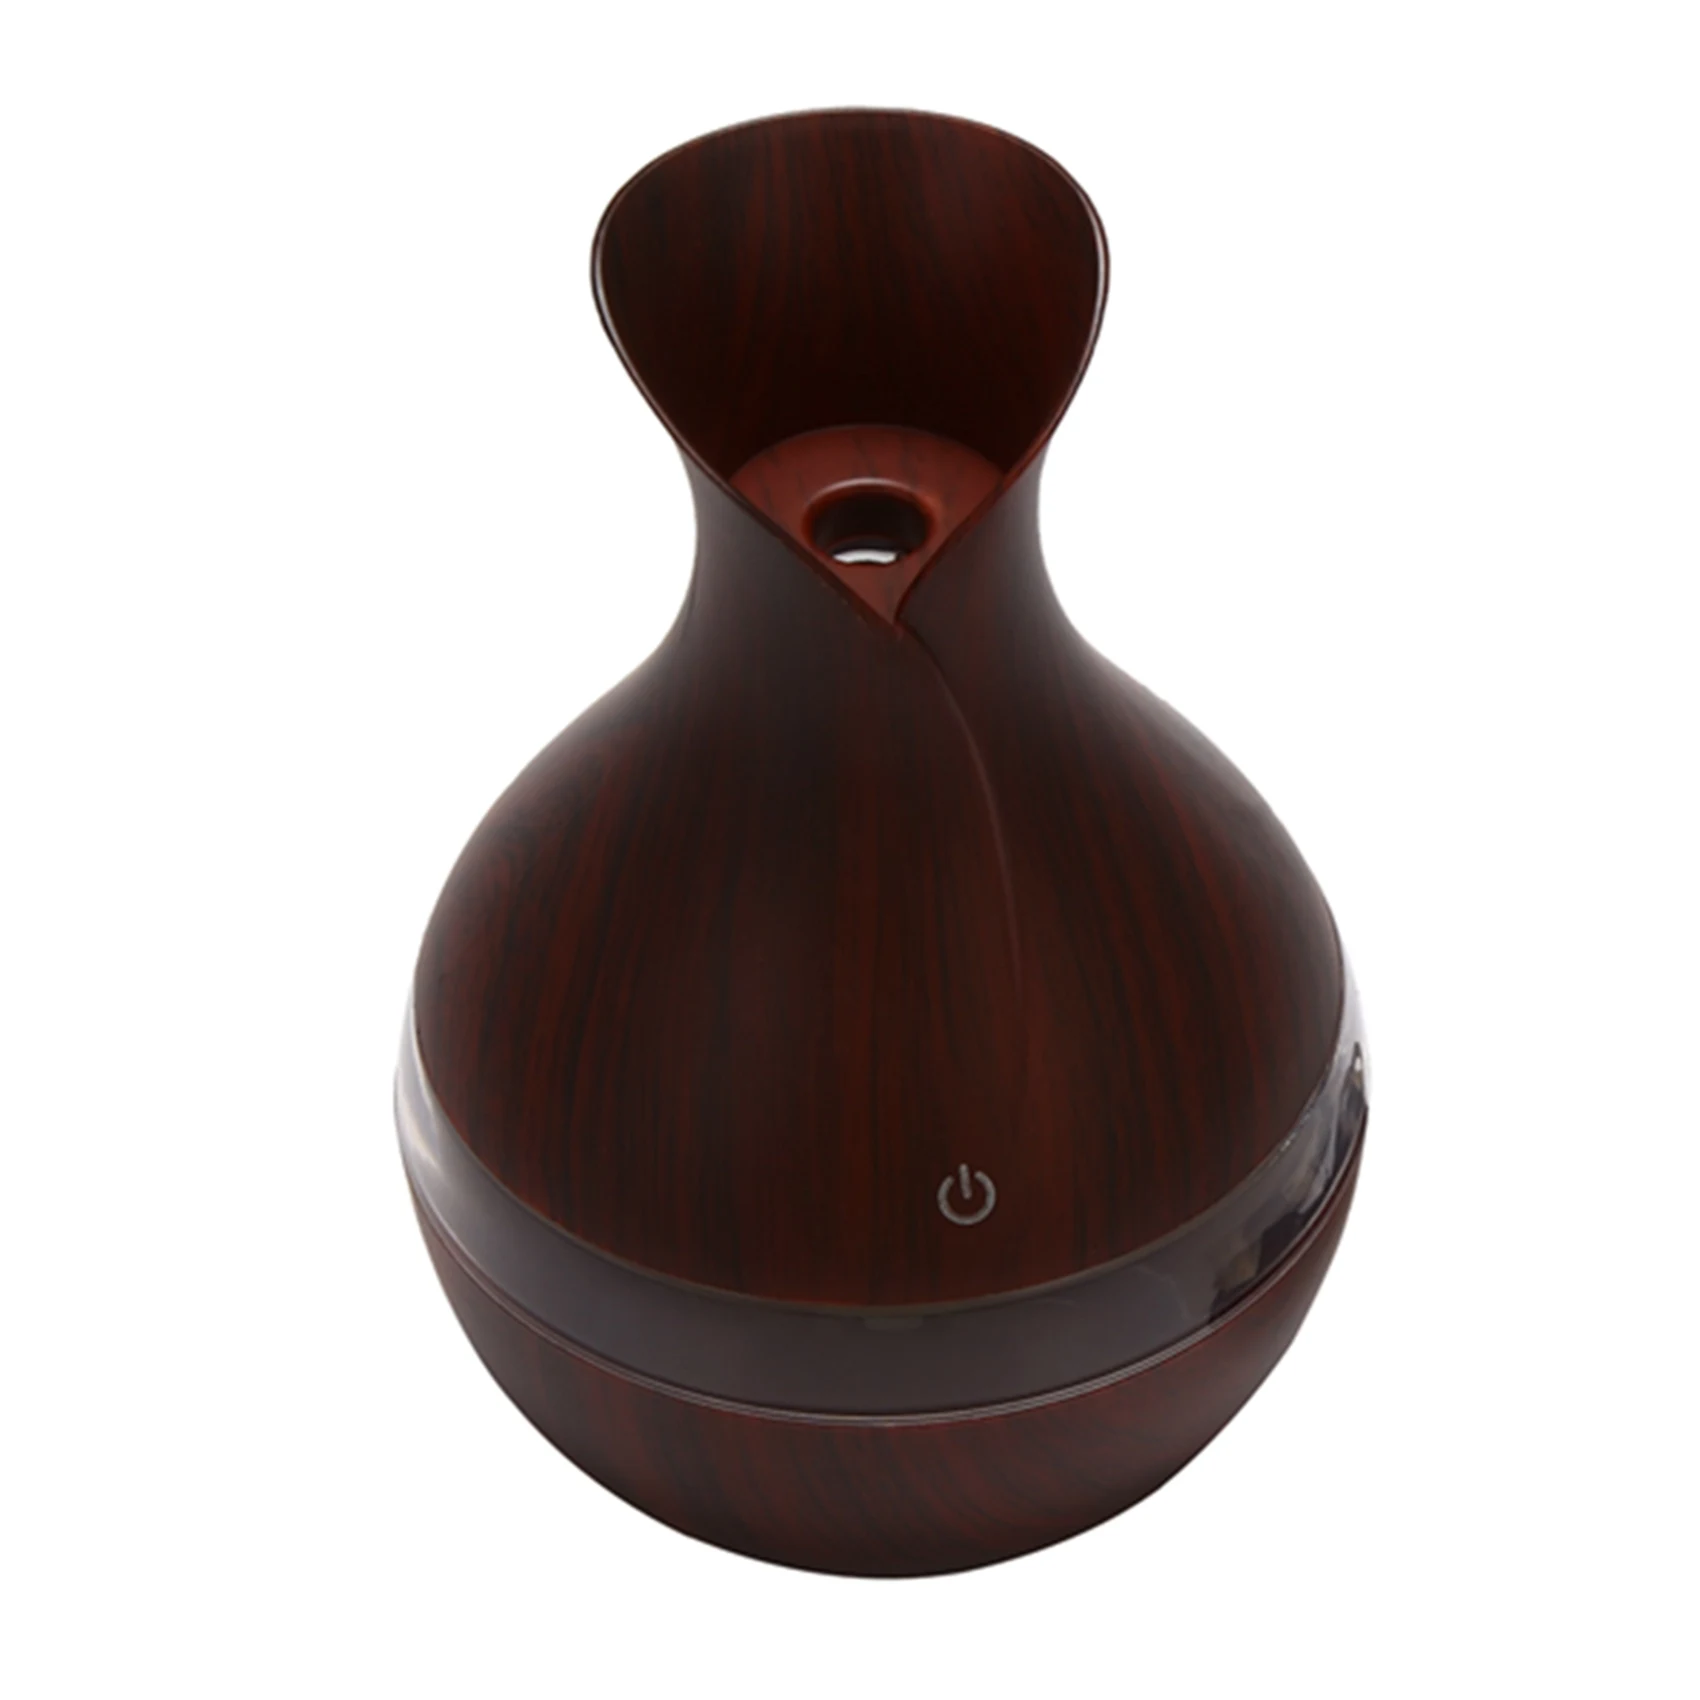 

300 Ml Ultrasonic Air Humidifier Aroma Essential Oil Diffuser With Wood Grain 7 Color Changing Led Lights For Office Home Dee